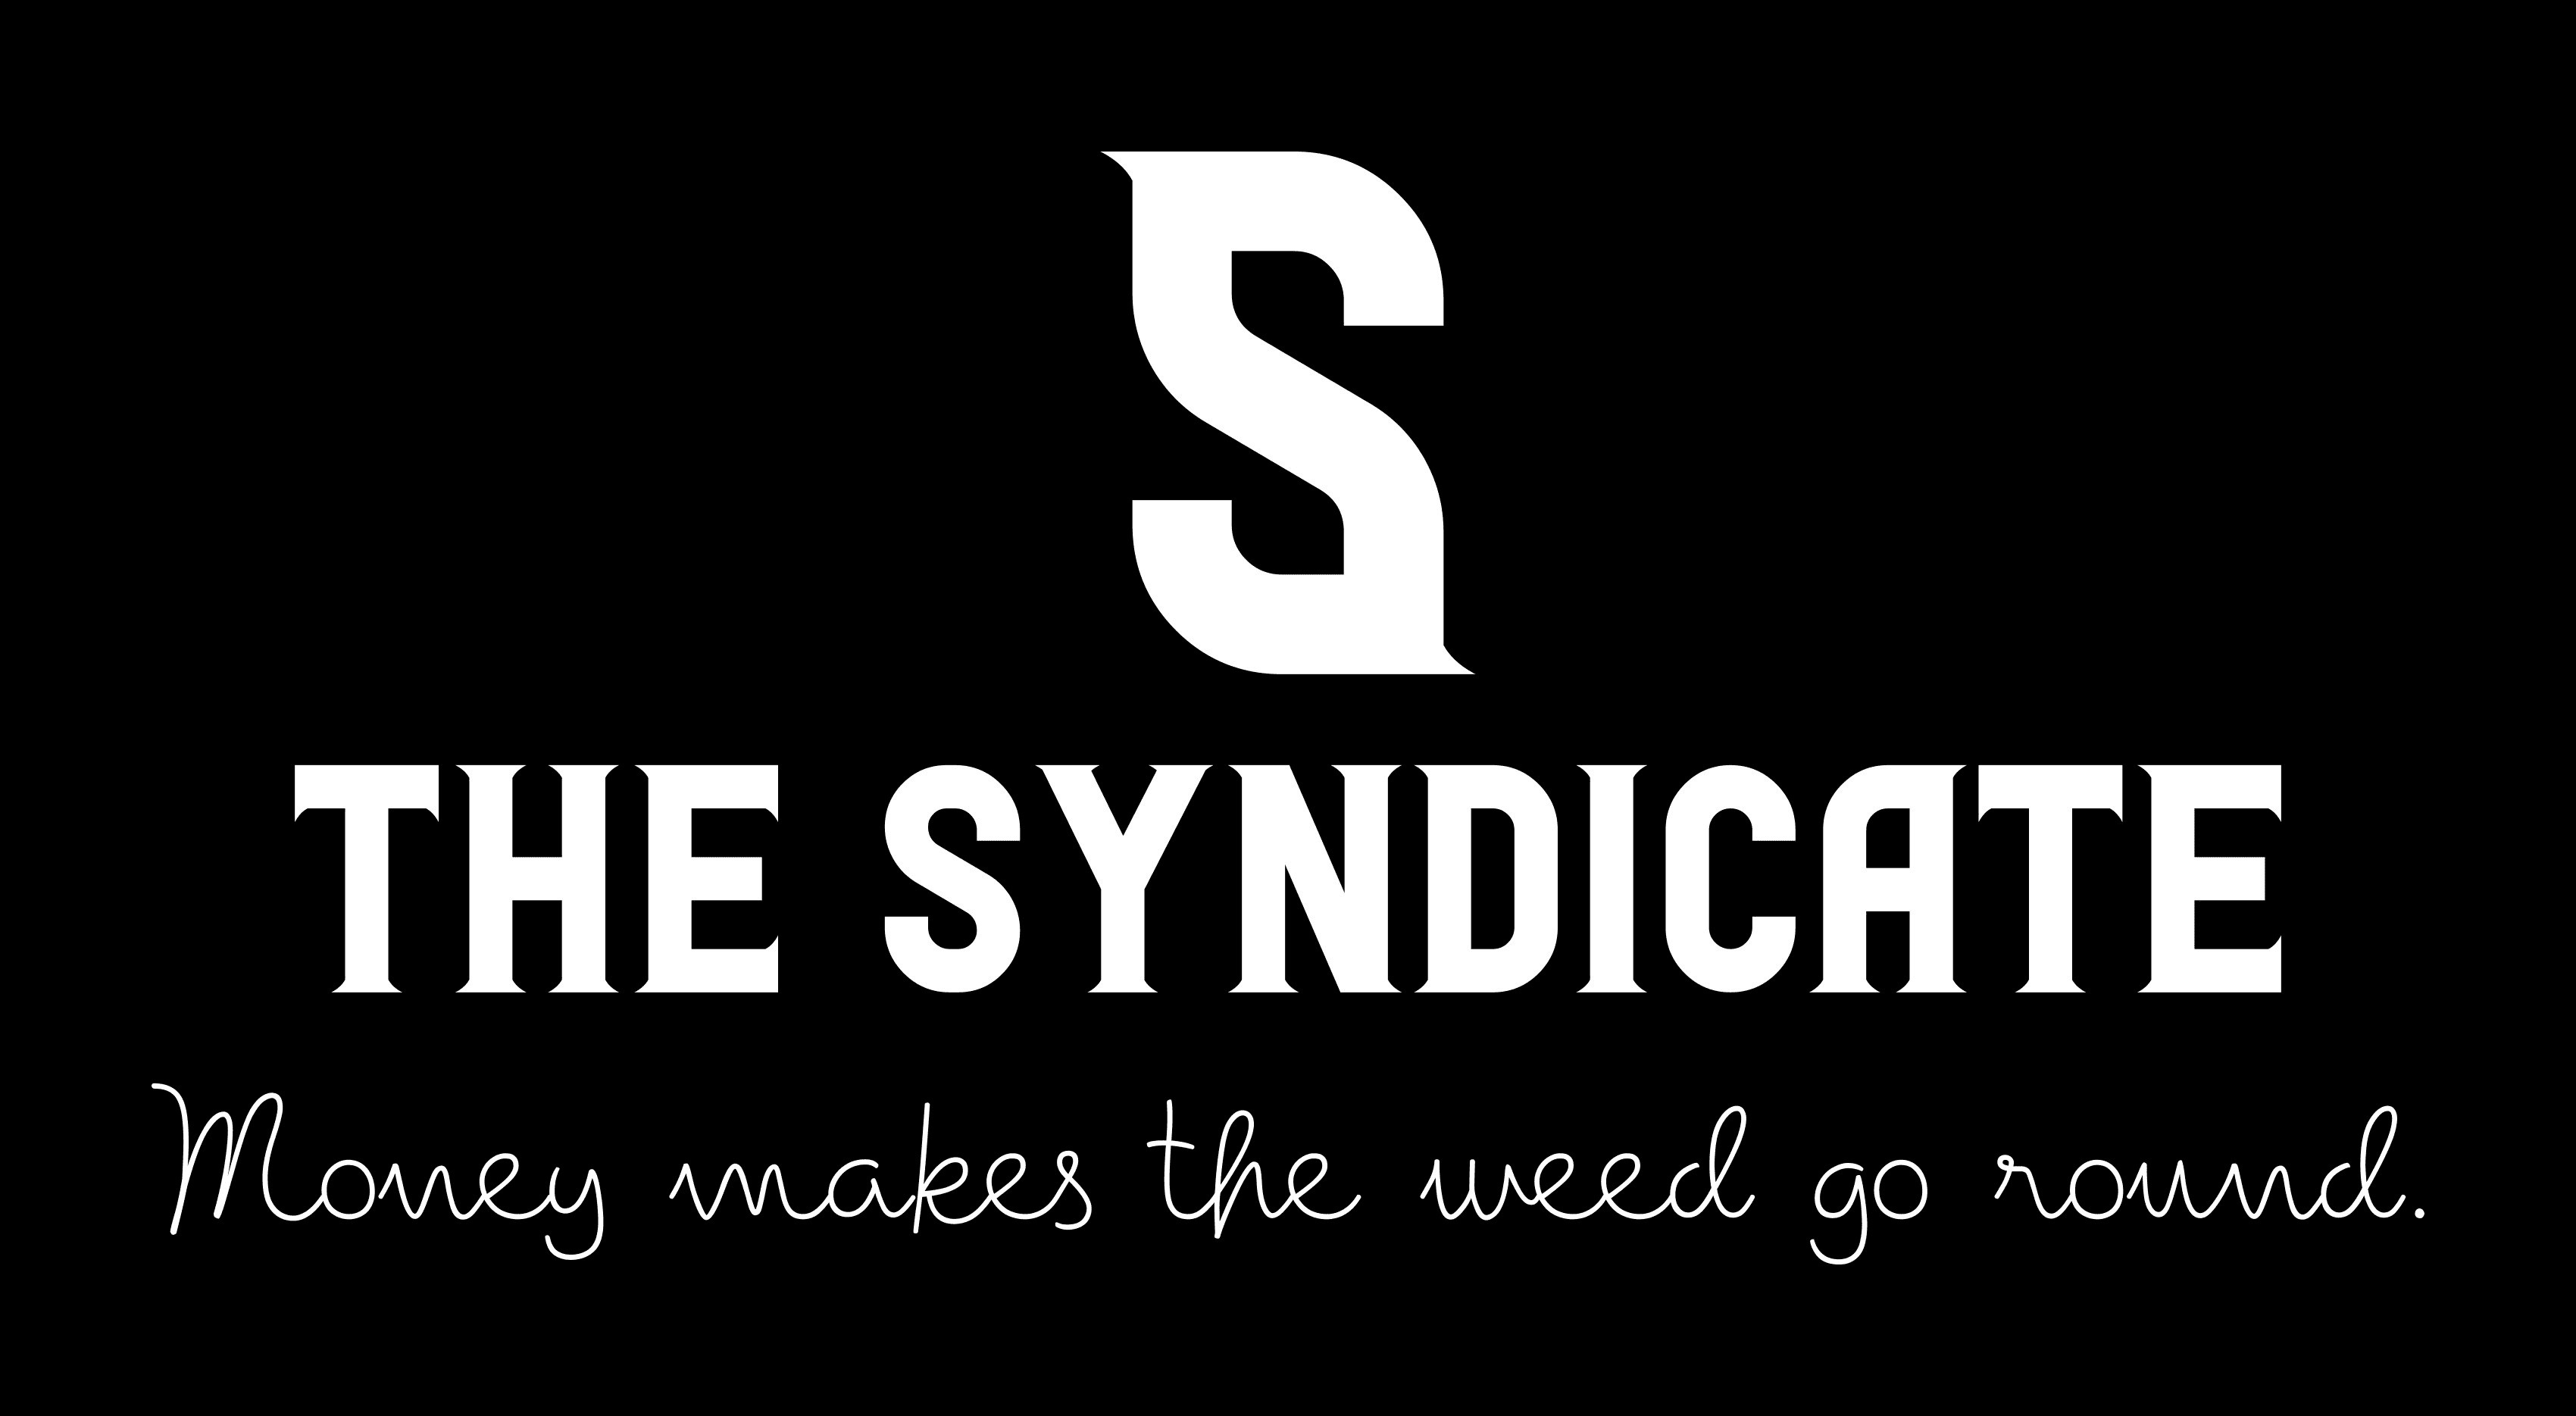 Wanderers - The Syndicate (Capo Badge)